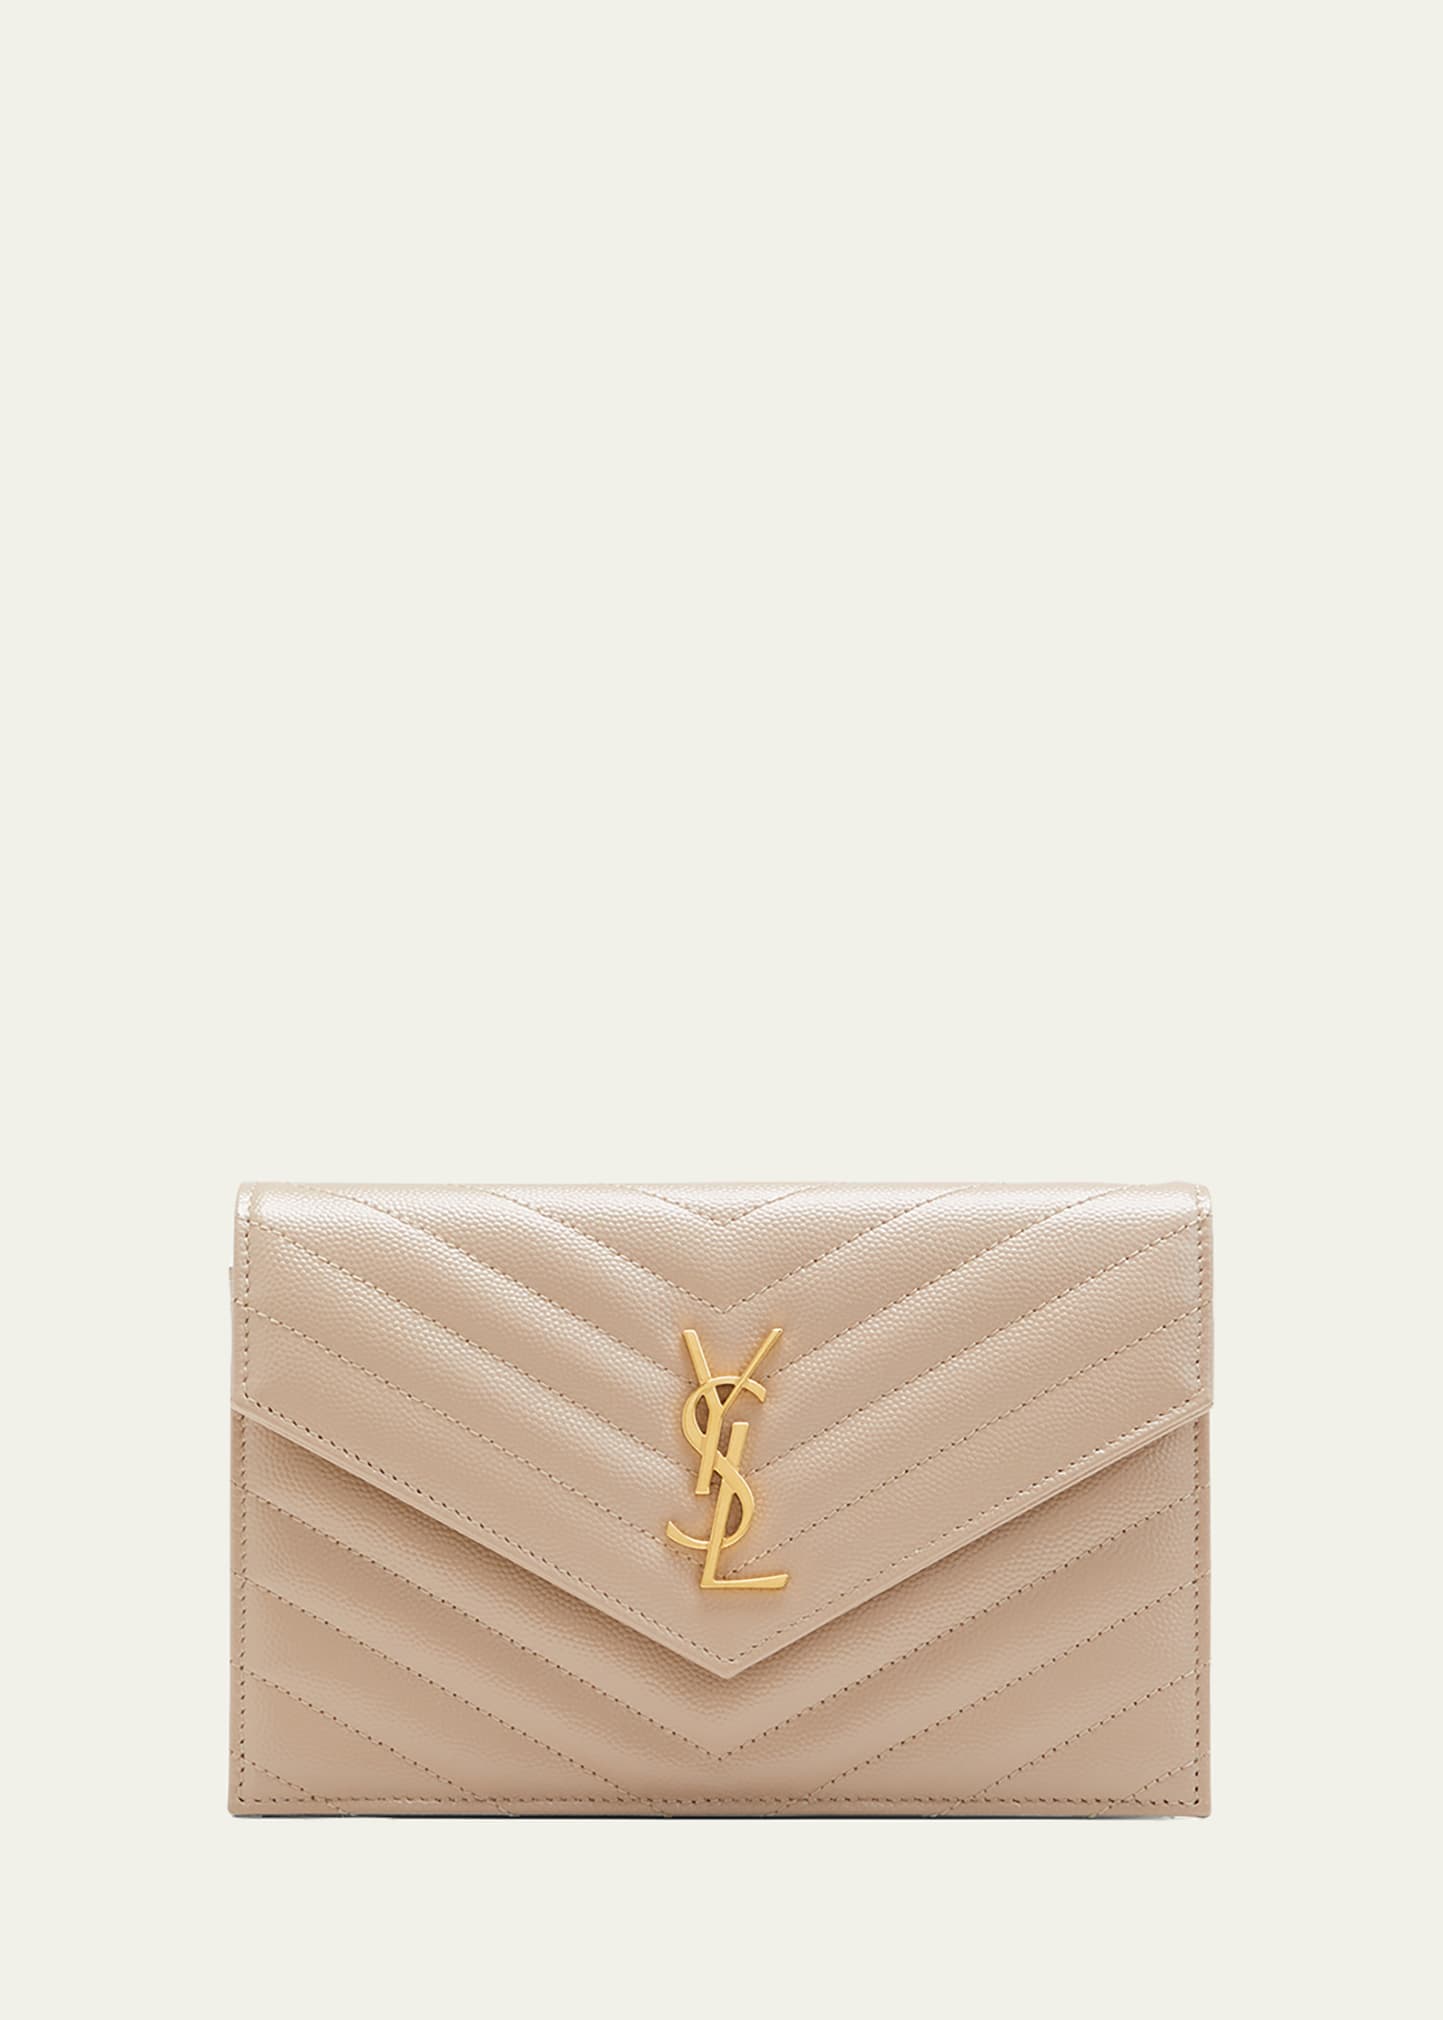 SAINT LAURENT YSL MONOGRAM SMALL WALLET ON CHAIN IN GRAINED LEATHER